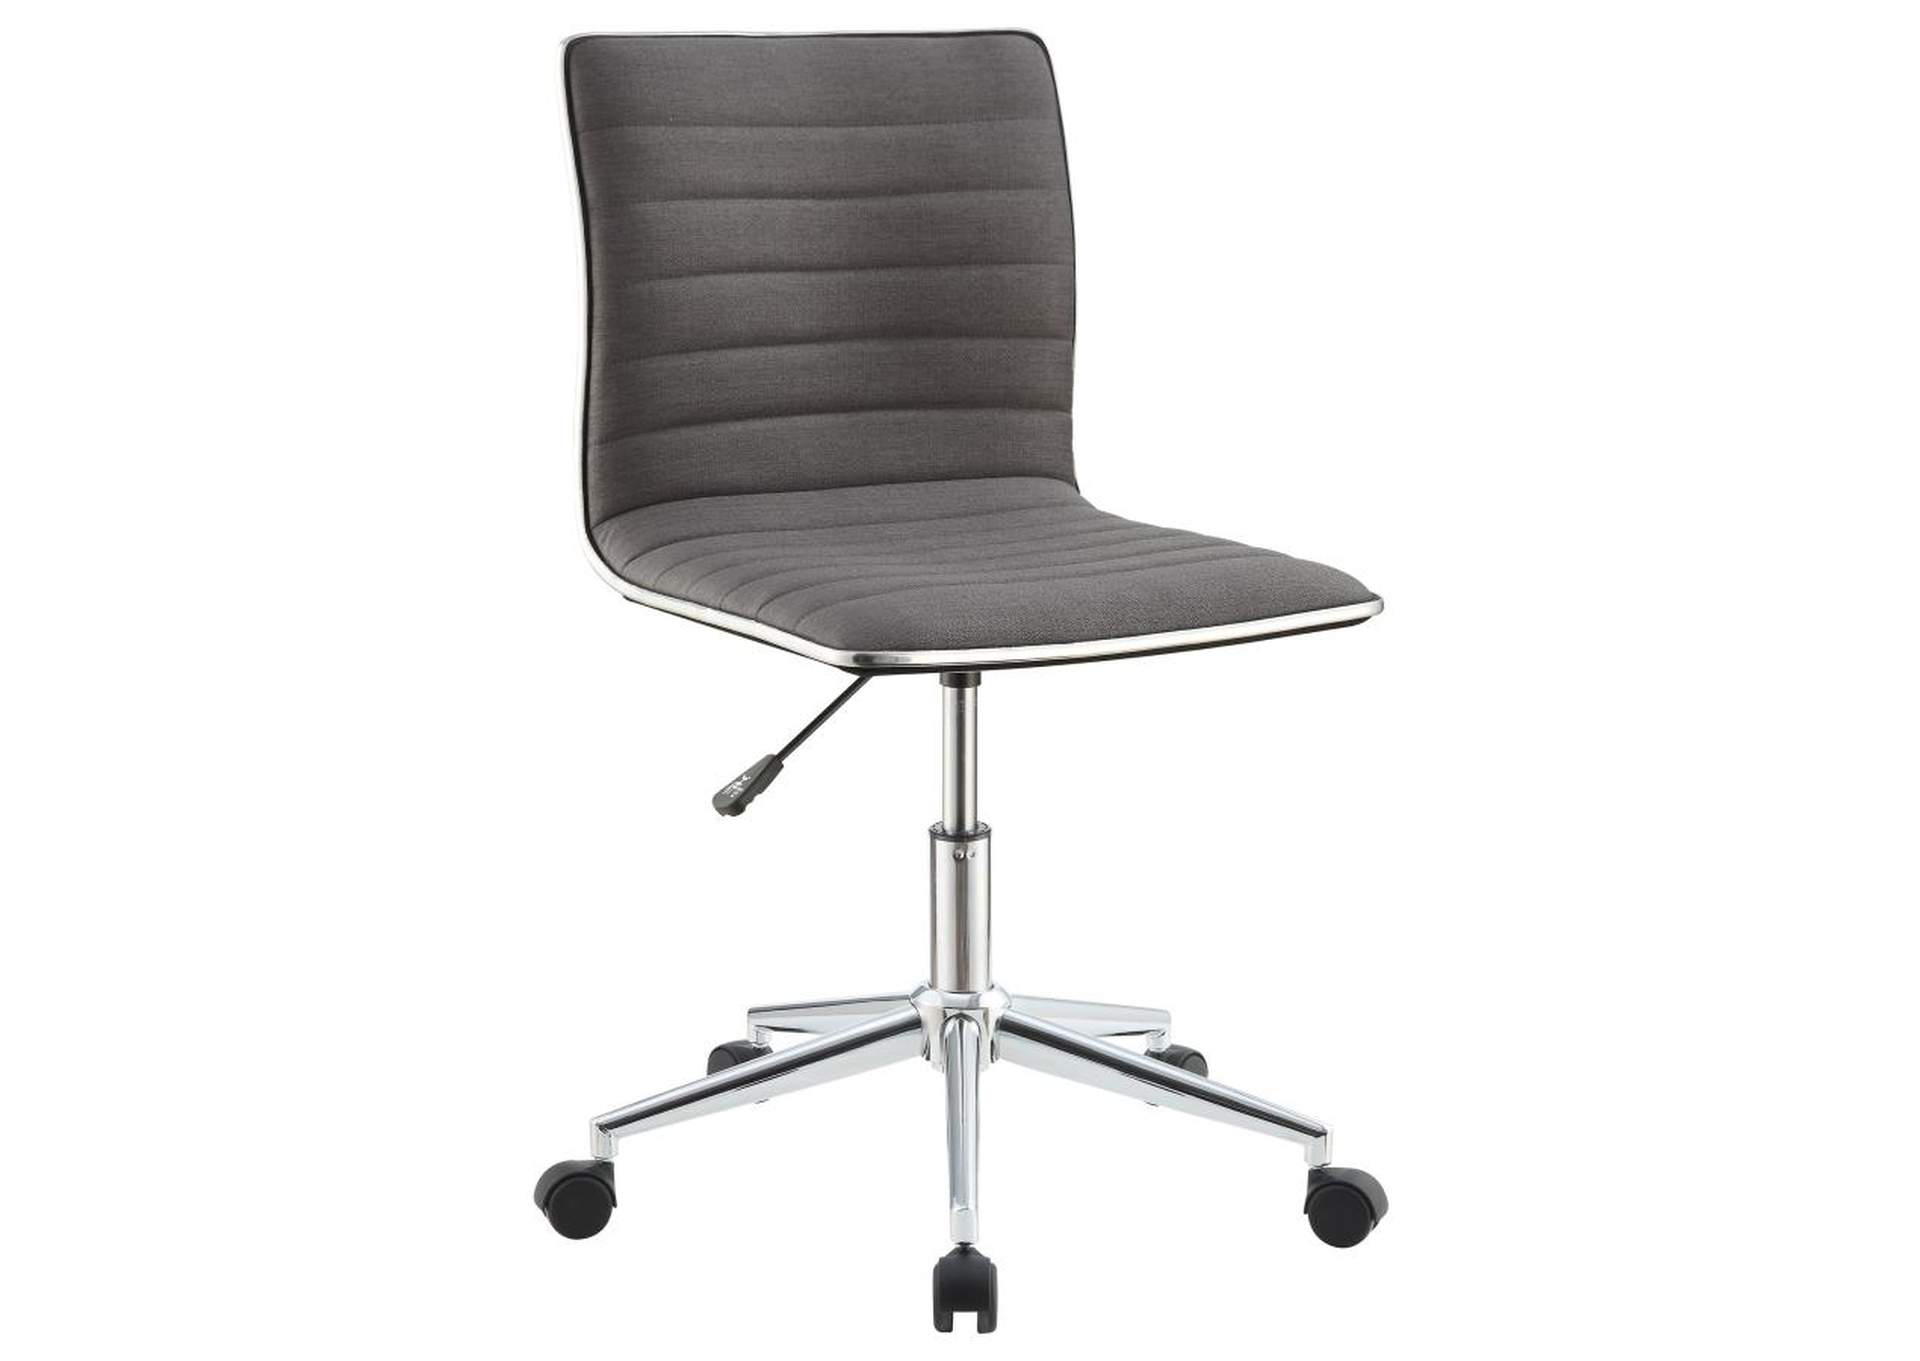 Adjustable Height Office Chair Grey and Chrome,Coaster Furniture